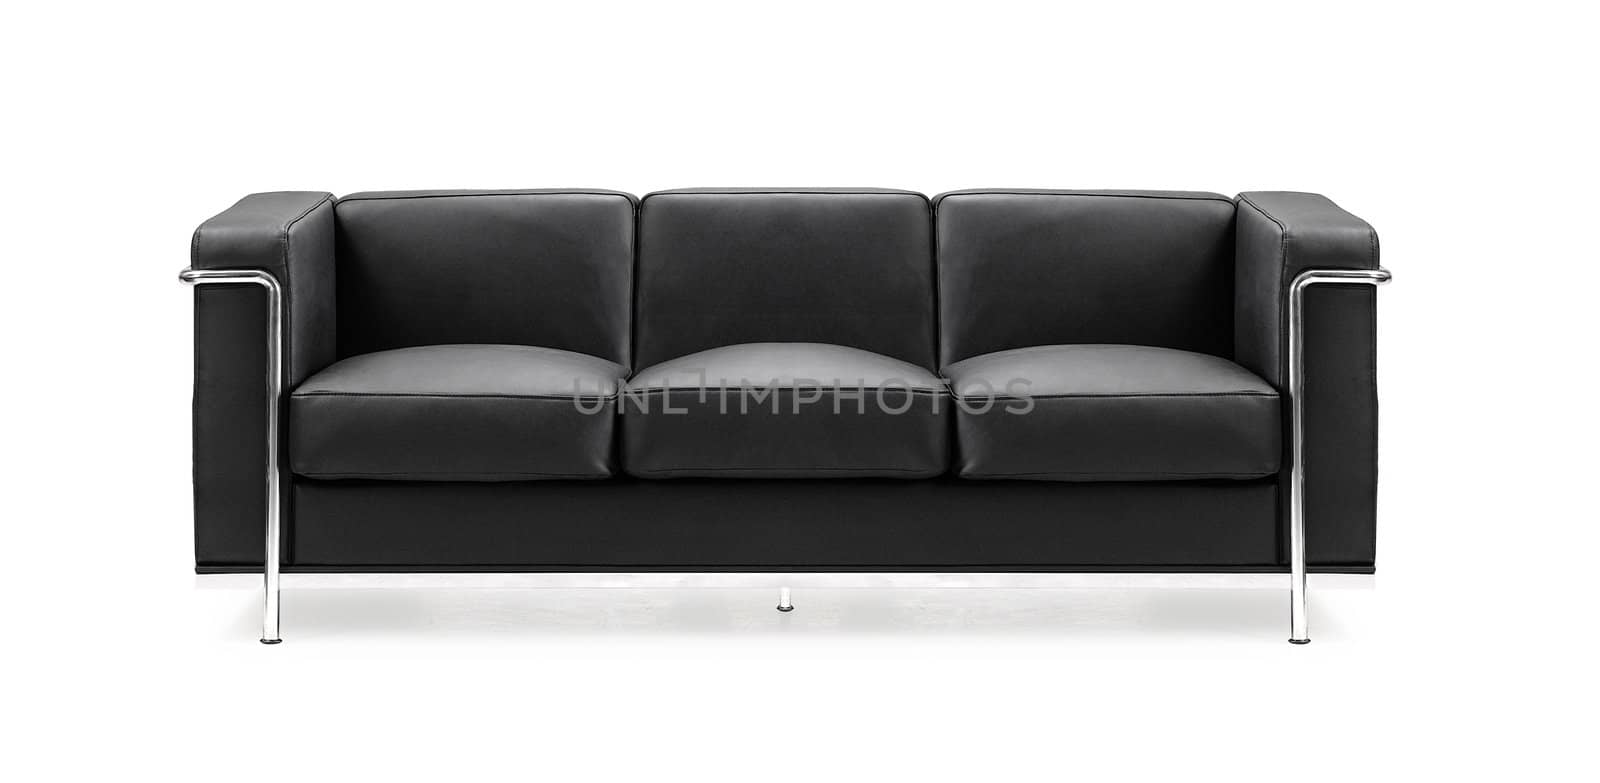 Image of a modern black leather sofa isolated by ozaiachin